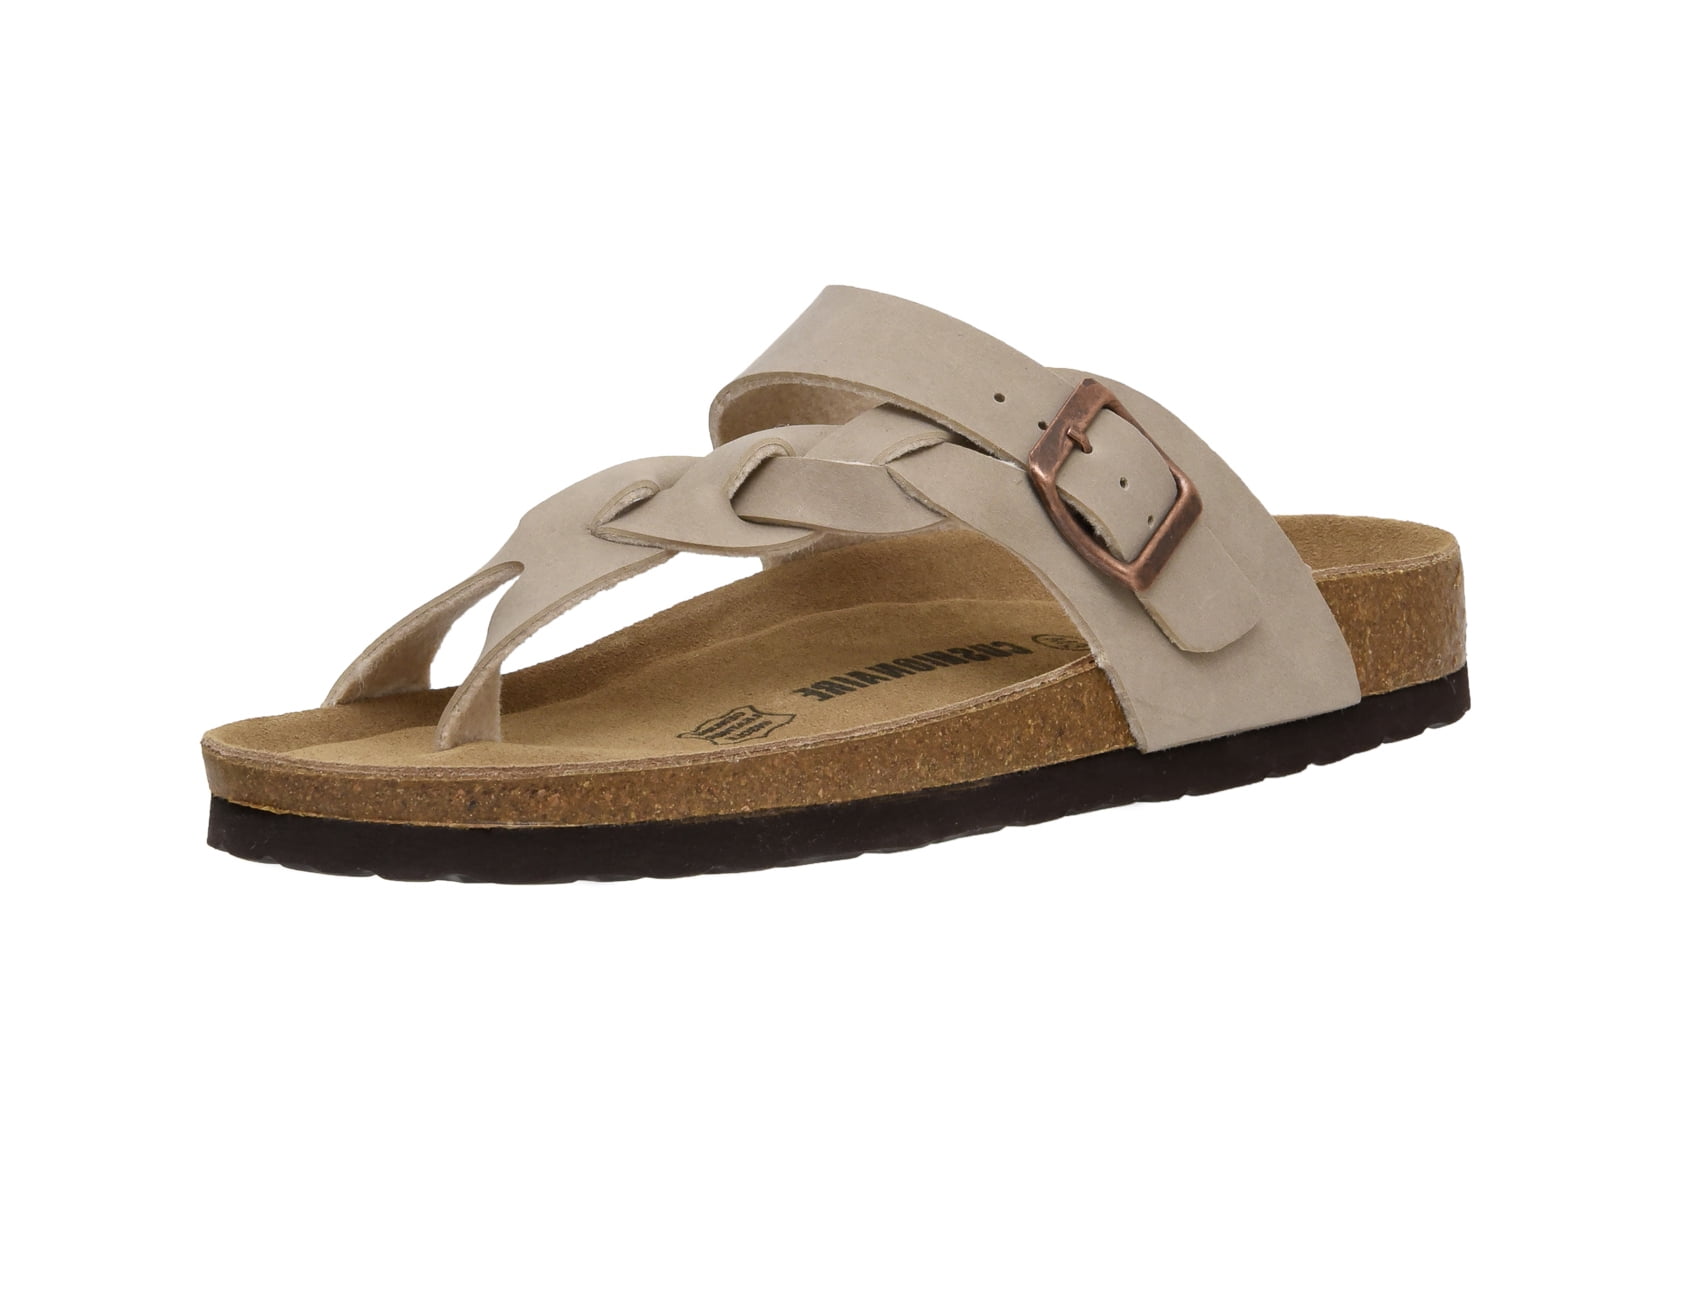 Women's Cushionaire Libby Cork Footbed Sandal with +Comfort - Walmart.com